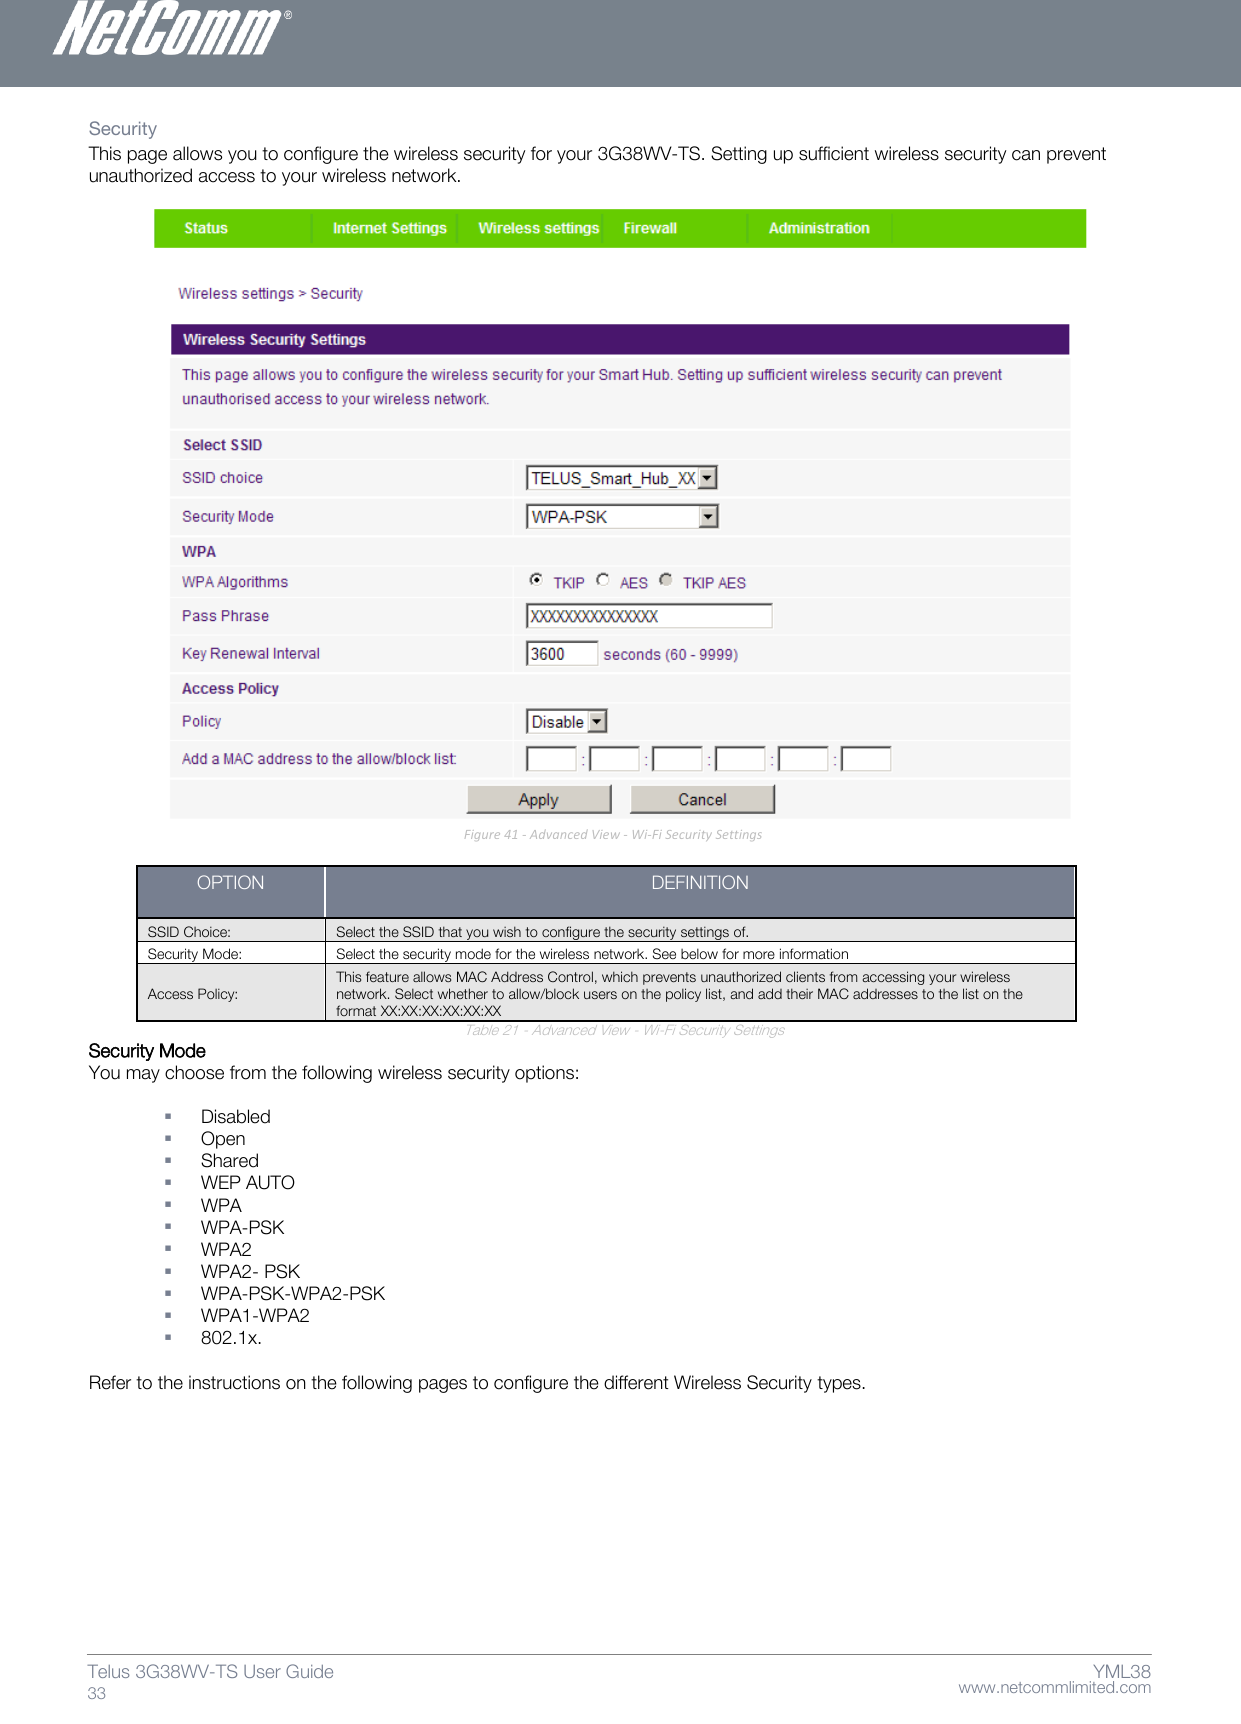    www.netcommlimited.com Telus 3G38WV-TS User Guide  33 YML38 Security  This page allows you to configure the wireless security for your 3G38WV-TS. Setting up sufficient wireless security can prevent unauthorized access to your wireless network.    Figure 41 - Advanced View - Wi-Fi Security Settings  OPTION DEFINITION SSID Choice:  Select the SSID that you wish to configure the security settings of.  Security Mode:  Select the security mode for the wireless network. See below for more information  Access Policy:  This feature allows MAC Address Control, which prevents unauthorized clients from accessing your wireless network. Select whether to allow/block users on the policy list, and add their MAC addresses to the list on the format XX:XX:XX:XX:XX:XX  Table 21 - Advanced View - Wi-Fi Security Settings Security Mode  You may choose from the following wireless security options:    Disabled  Open  Shared  WEP AUTO  WPA  WPA-PSK  WPA2  WPA2- PSK  WPA-PSK-WPA2-PSK  WPA1-WPA2  802.1x.   Refer to the instructions on the following pages to configure the different Wireless Security types.   